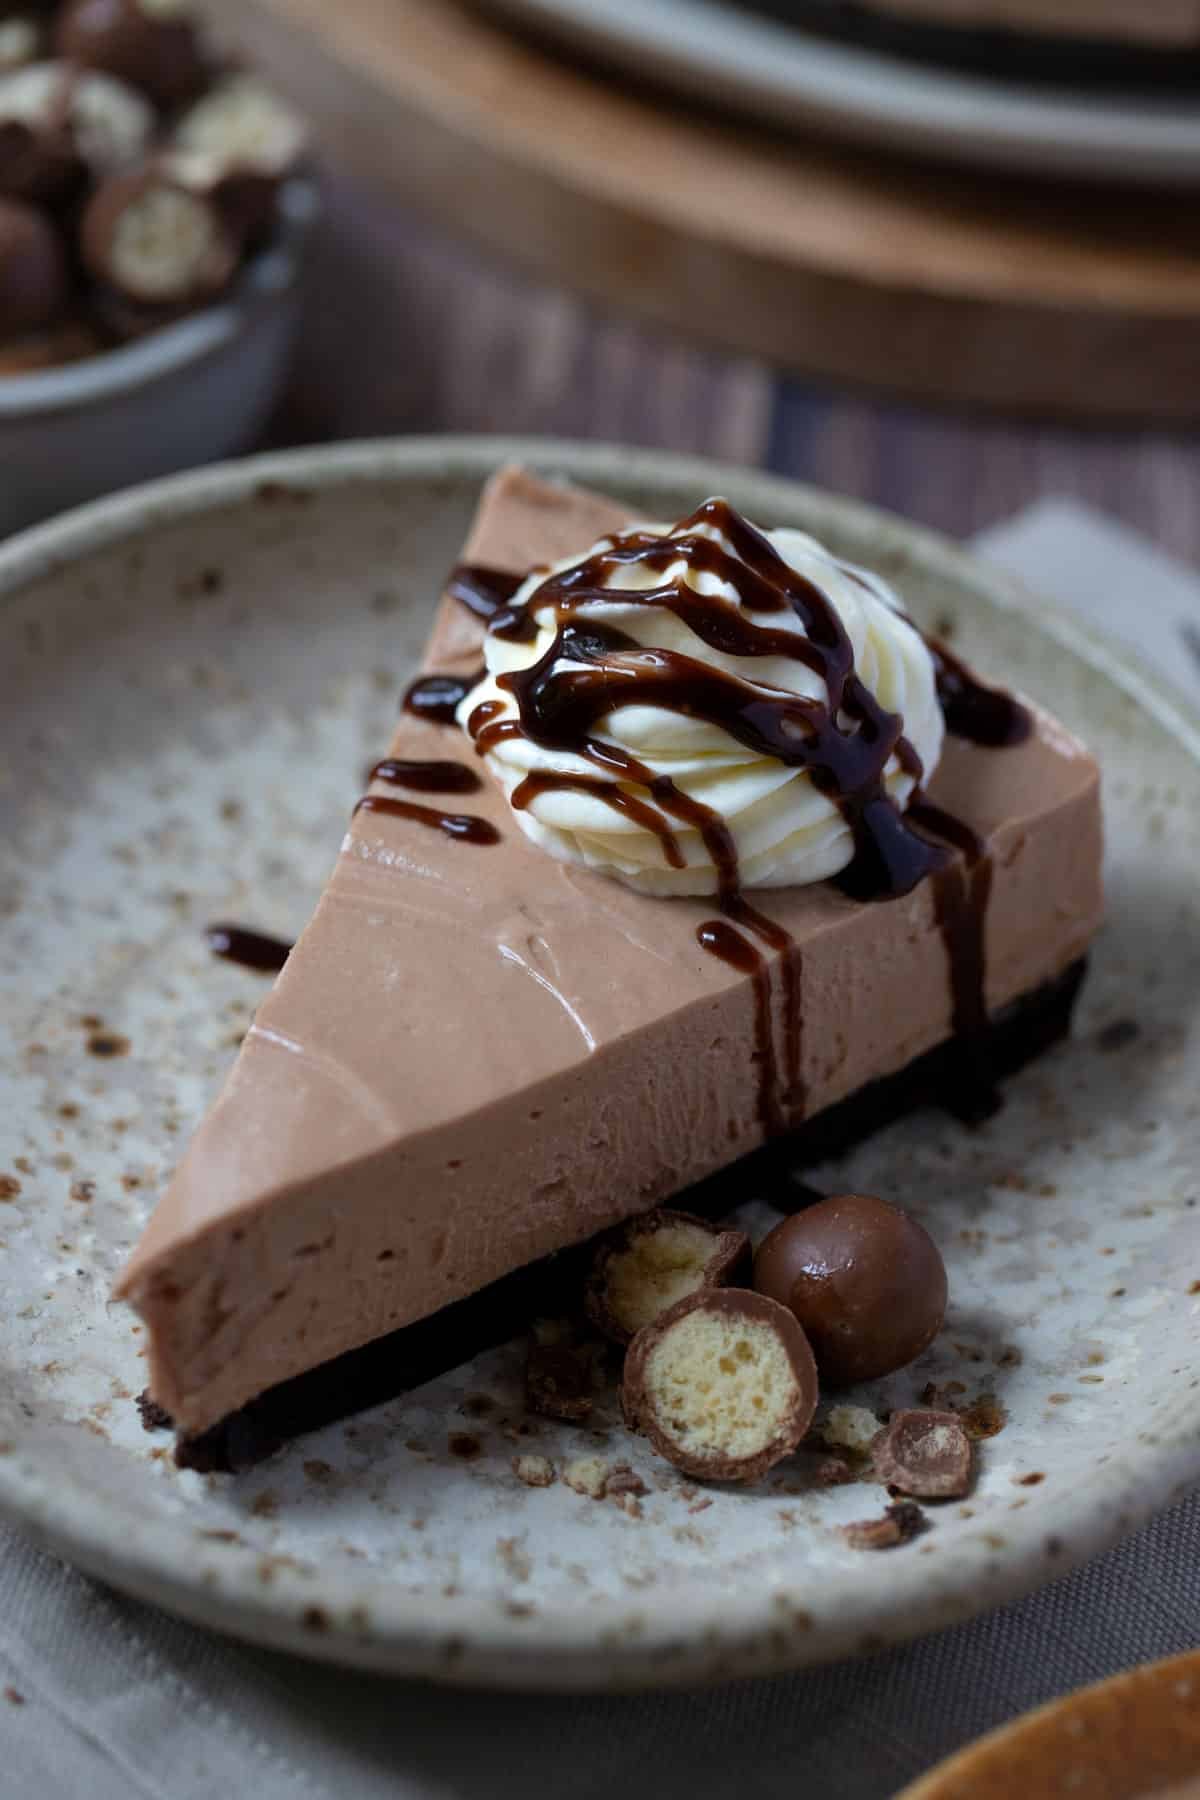 a slice of chocolate cheesecake on a plate with crushed chocolate and whipped cream.